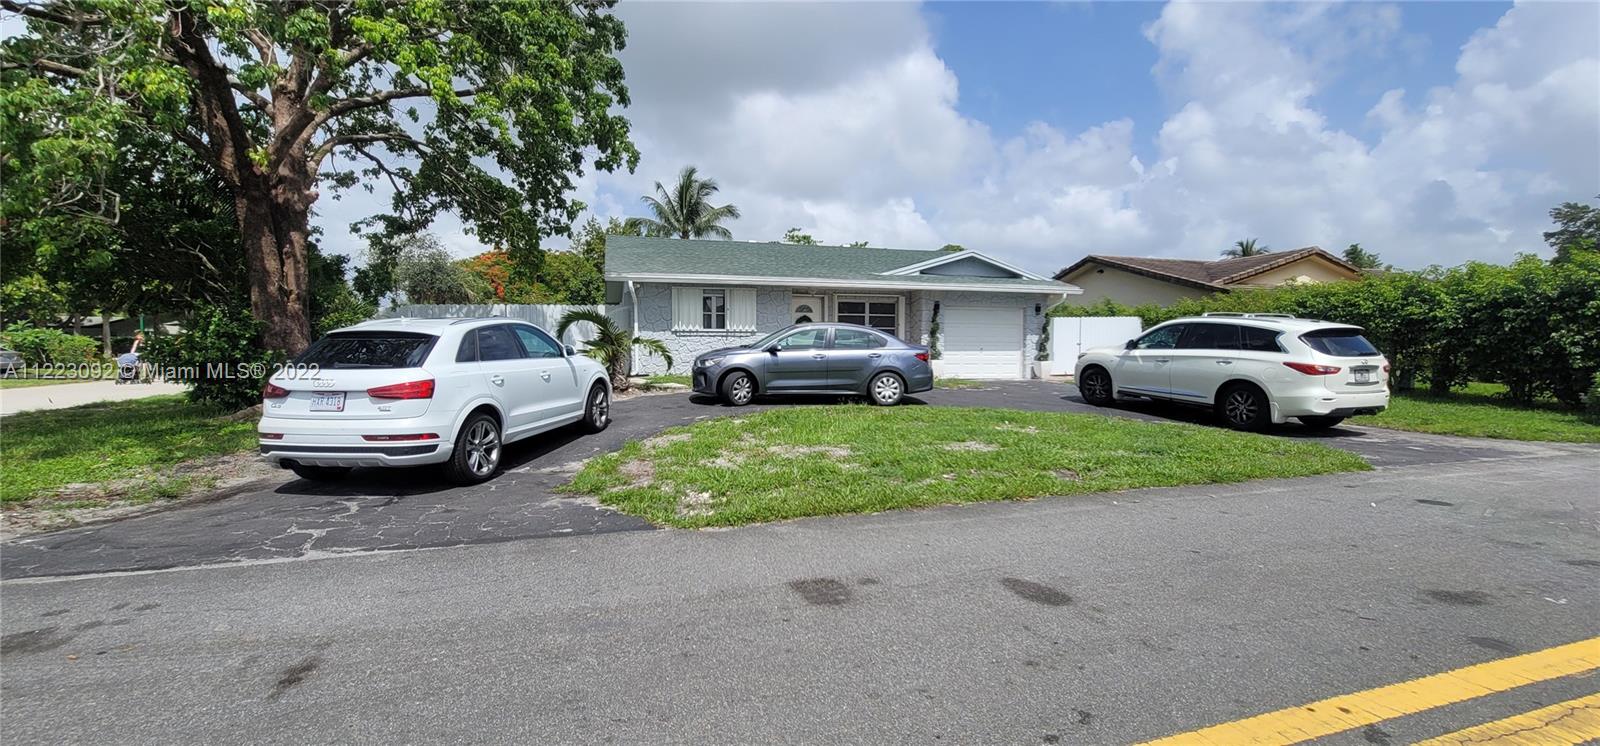 6301 NW 33rd Way  For Sale A11223092, FL